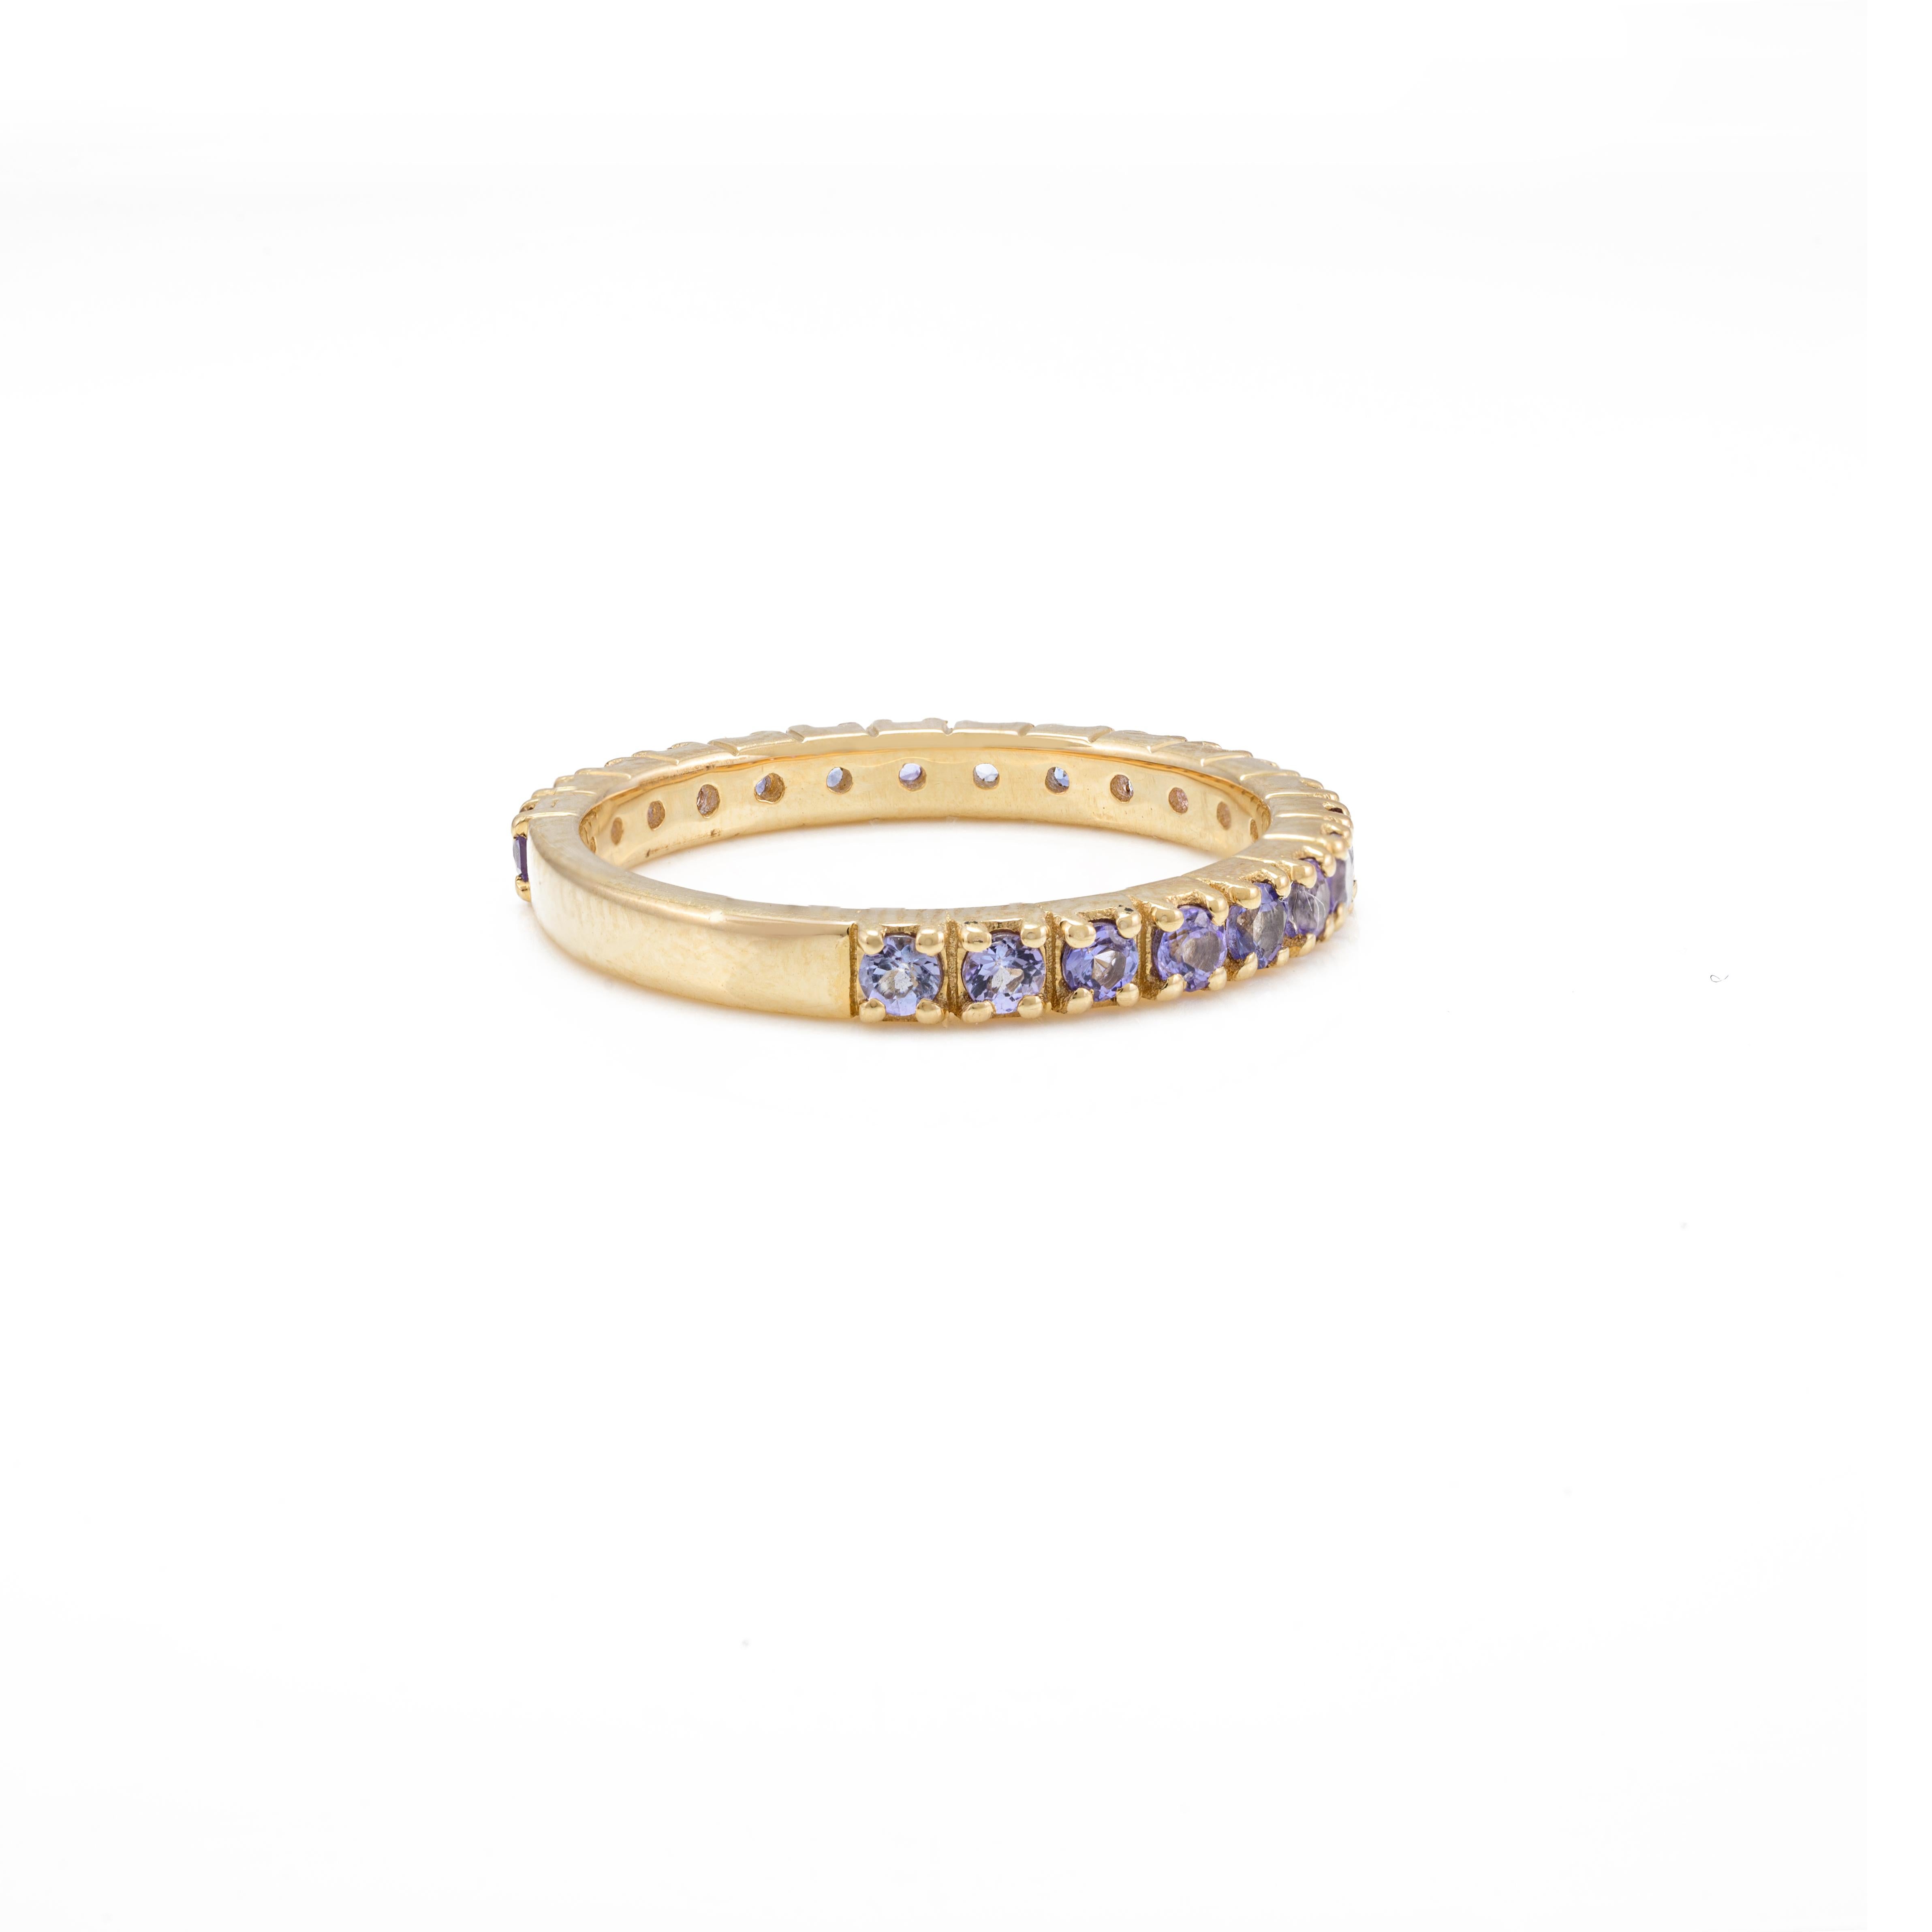 For Sale:  Genuine Round Cut Tanzanite Full Eternity Band Ring 14k Solid Yellow Gold 3